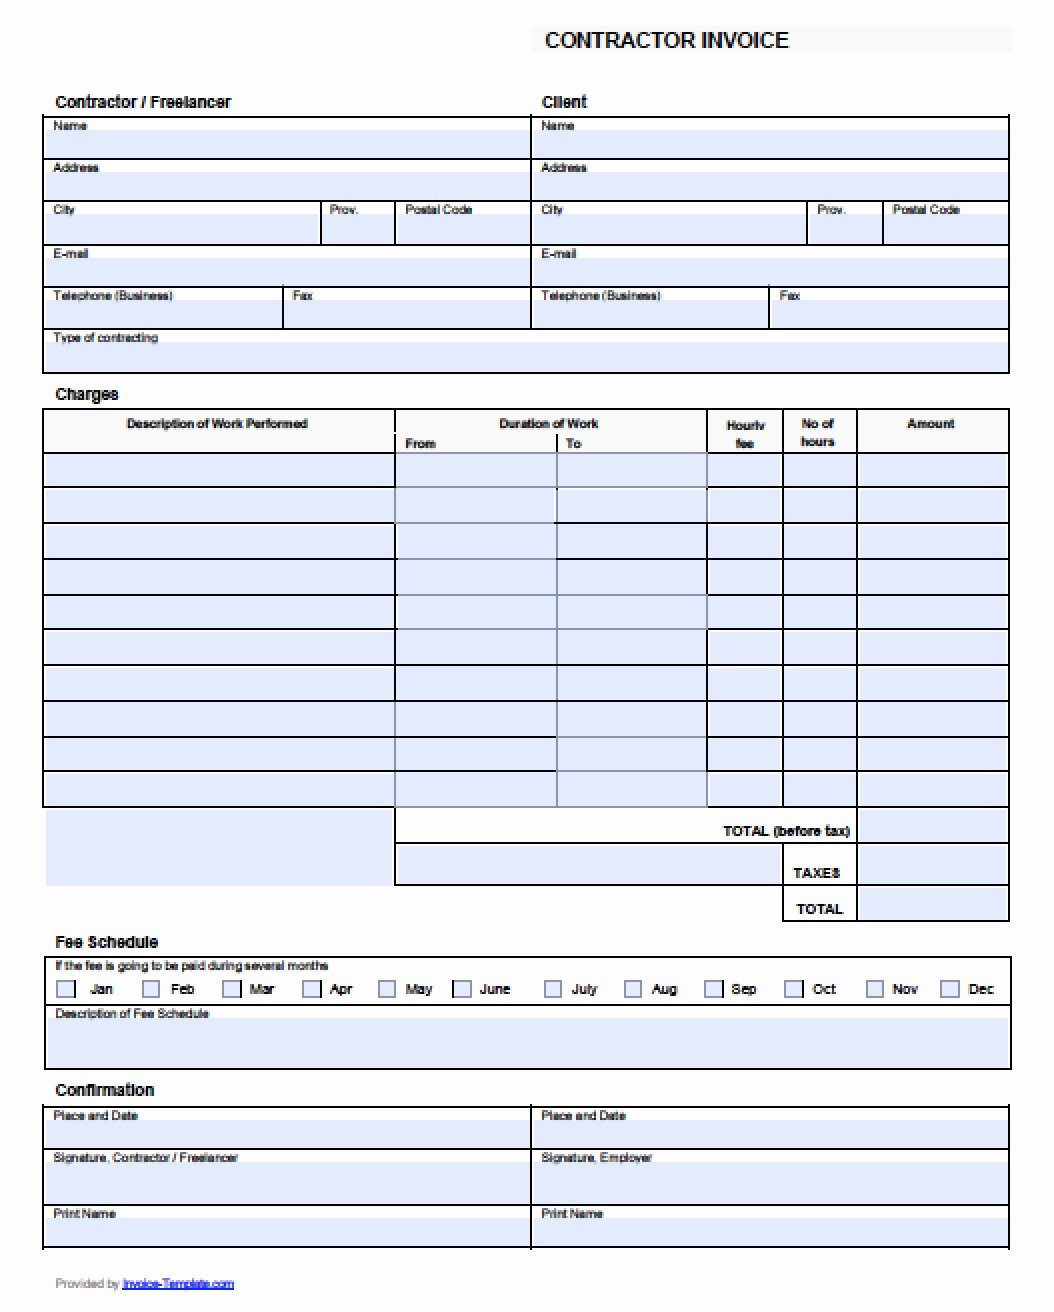 Free Contractor Invoice Template Beautiful Free Contractor Invoice Template Excel Pdf